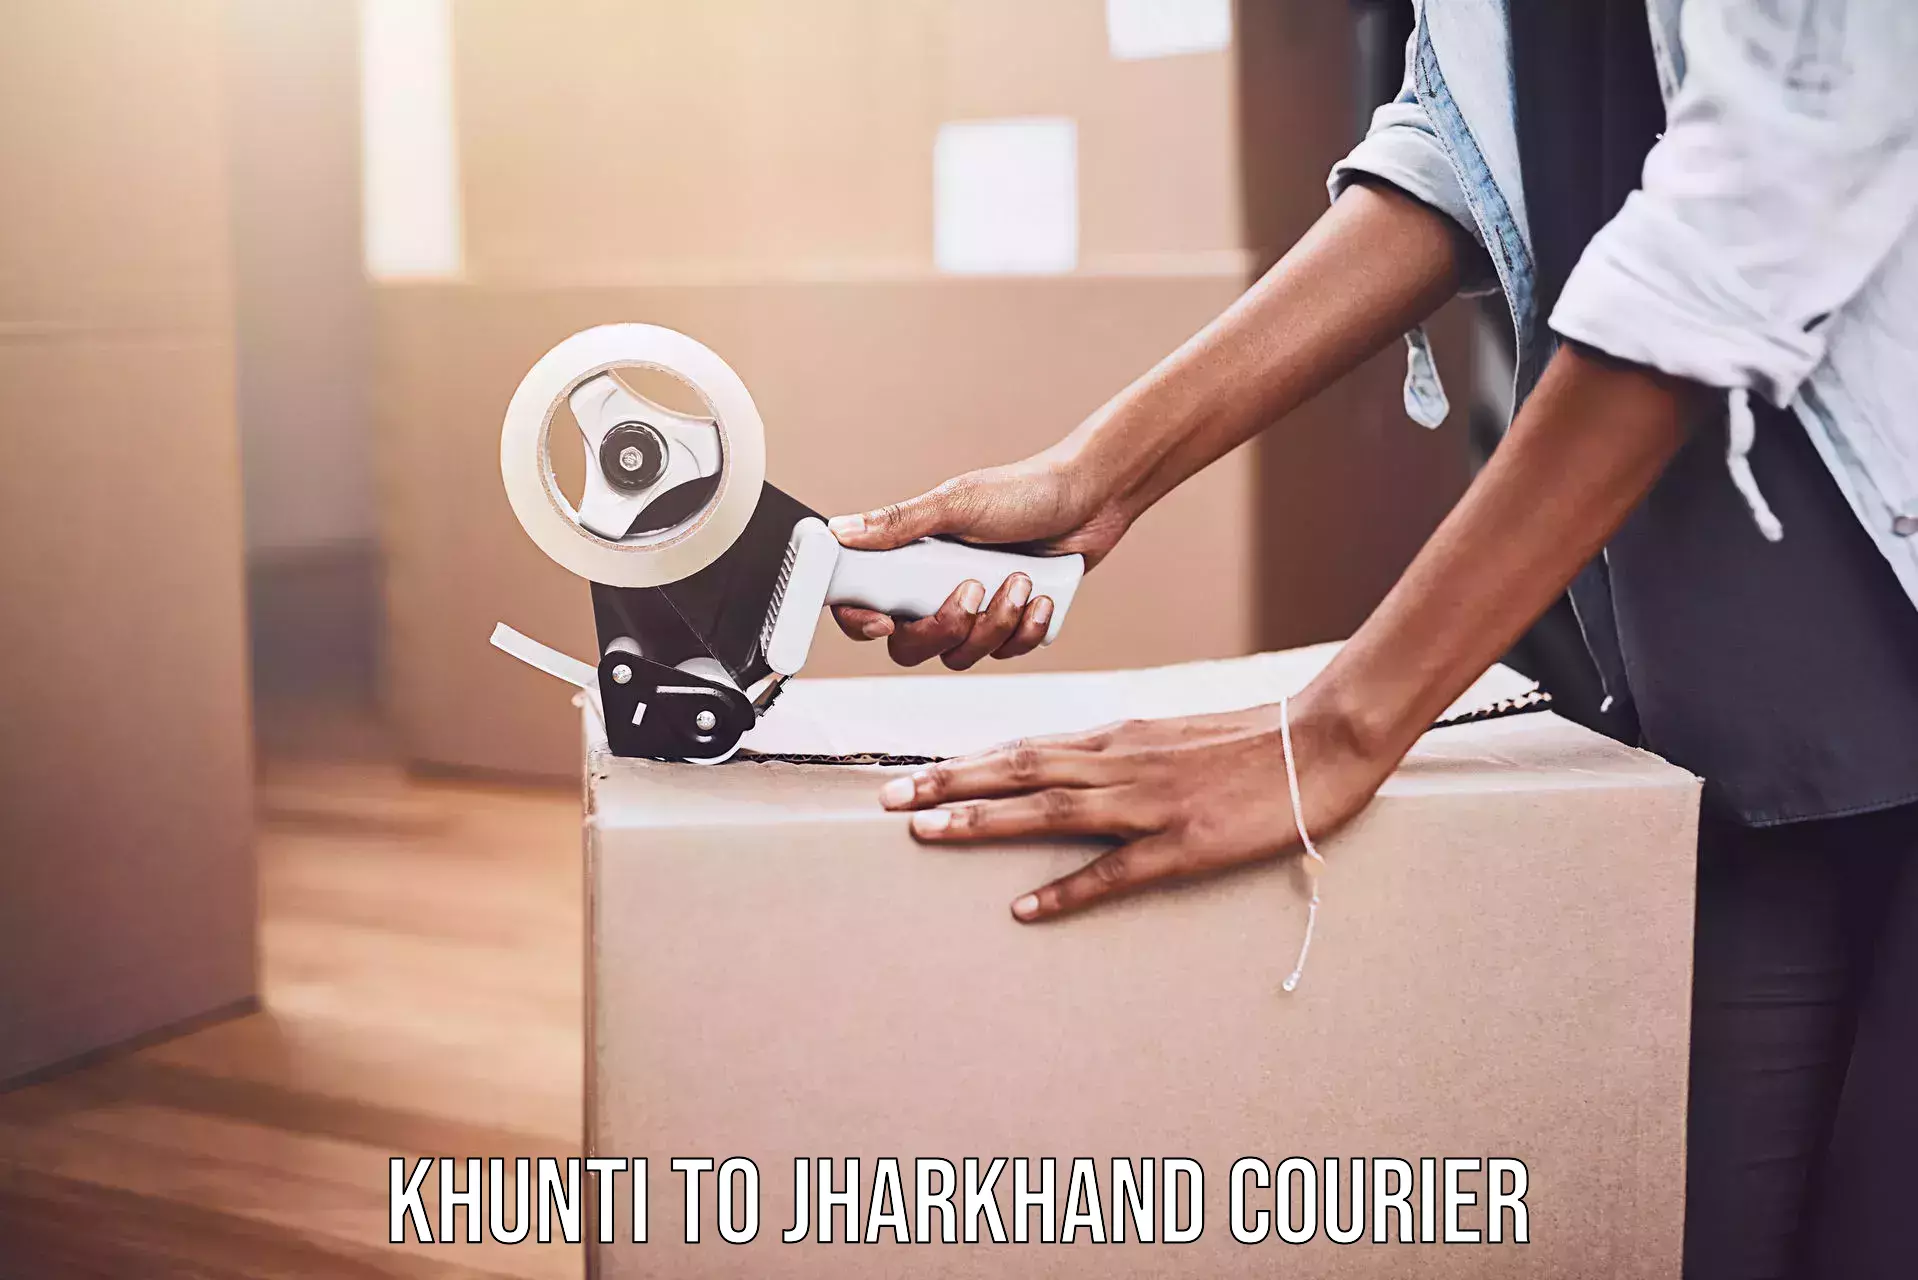 Reliable delivery network Khunti to Jharkhand